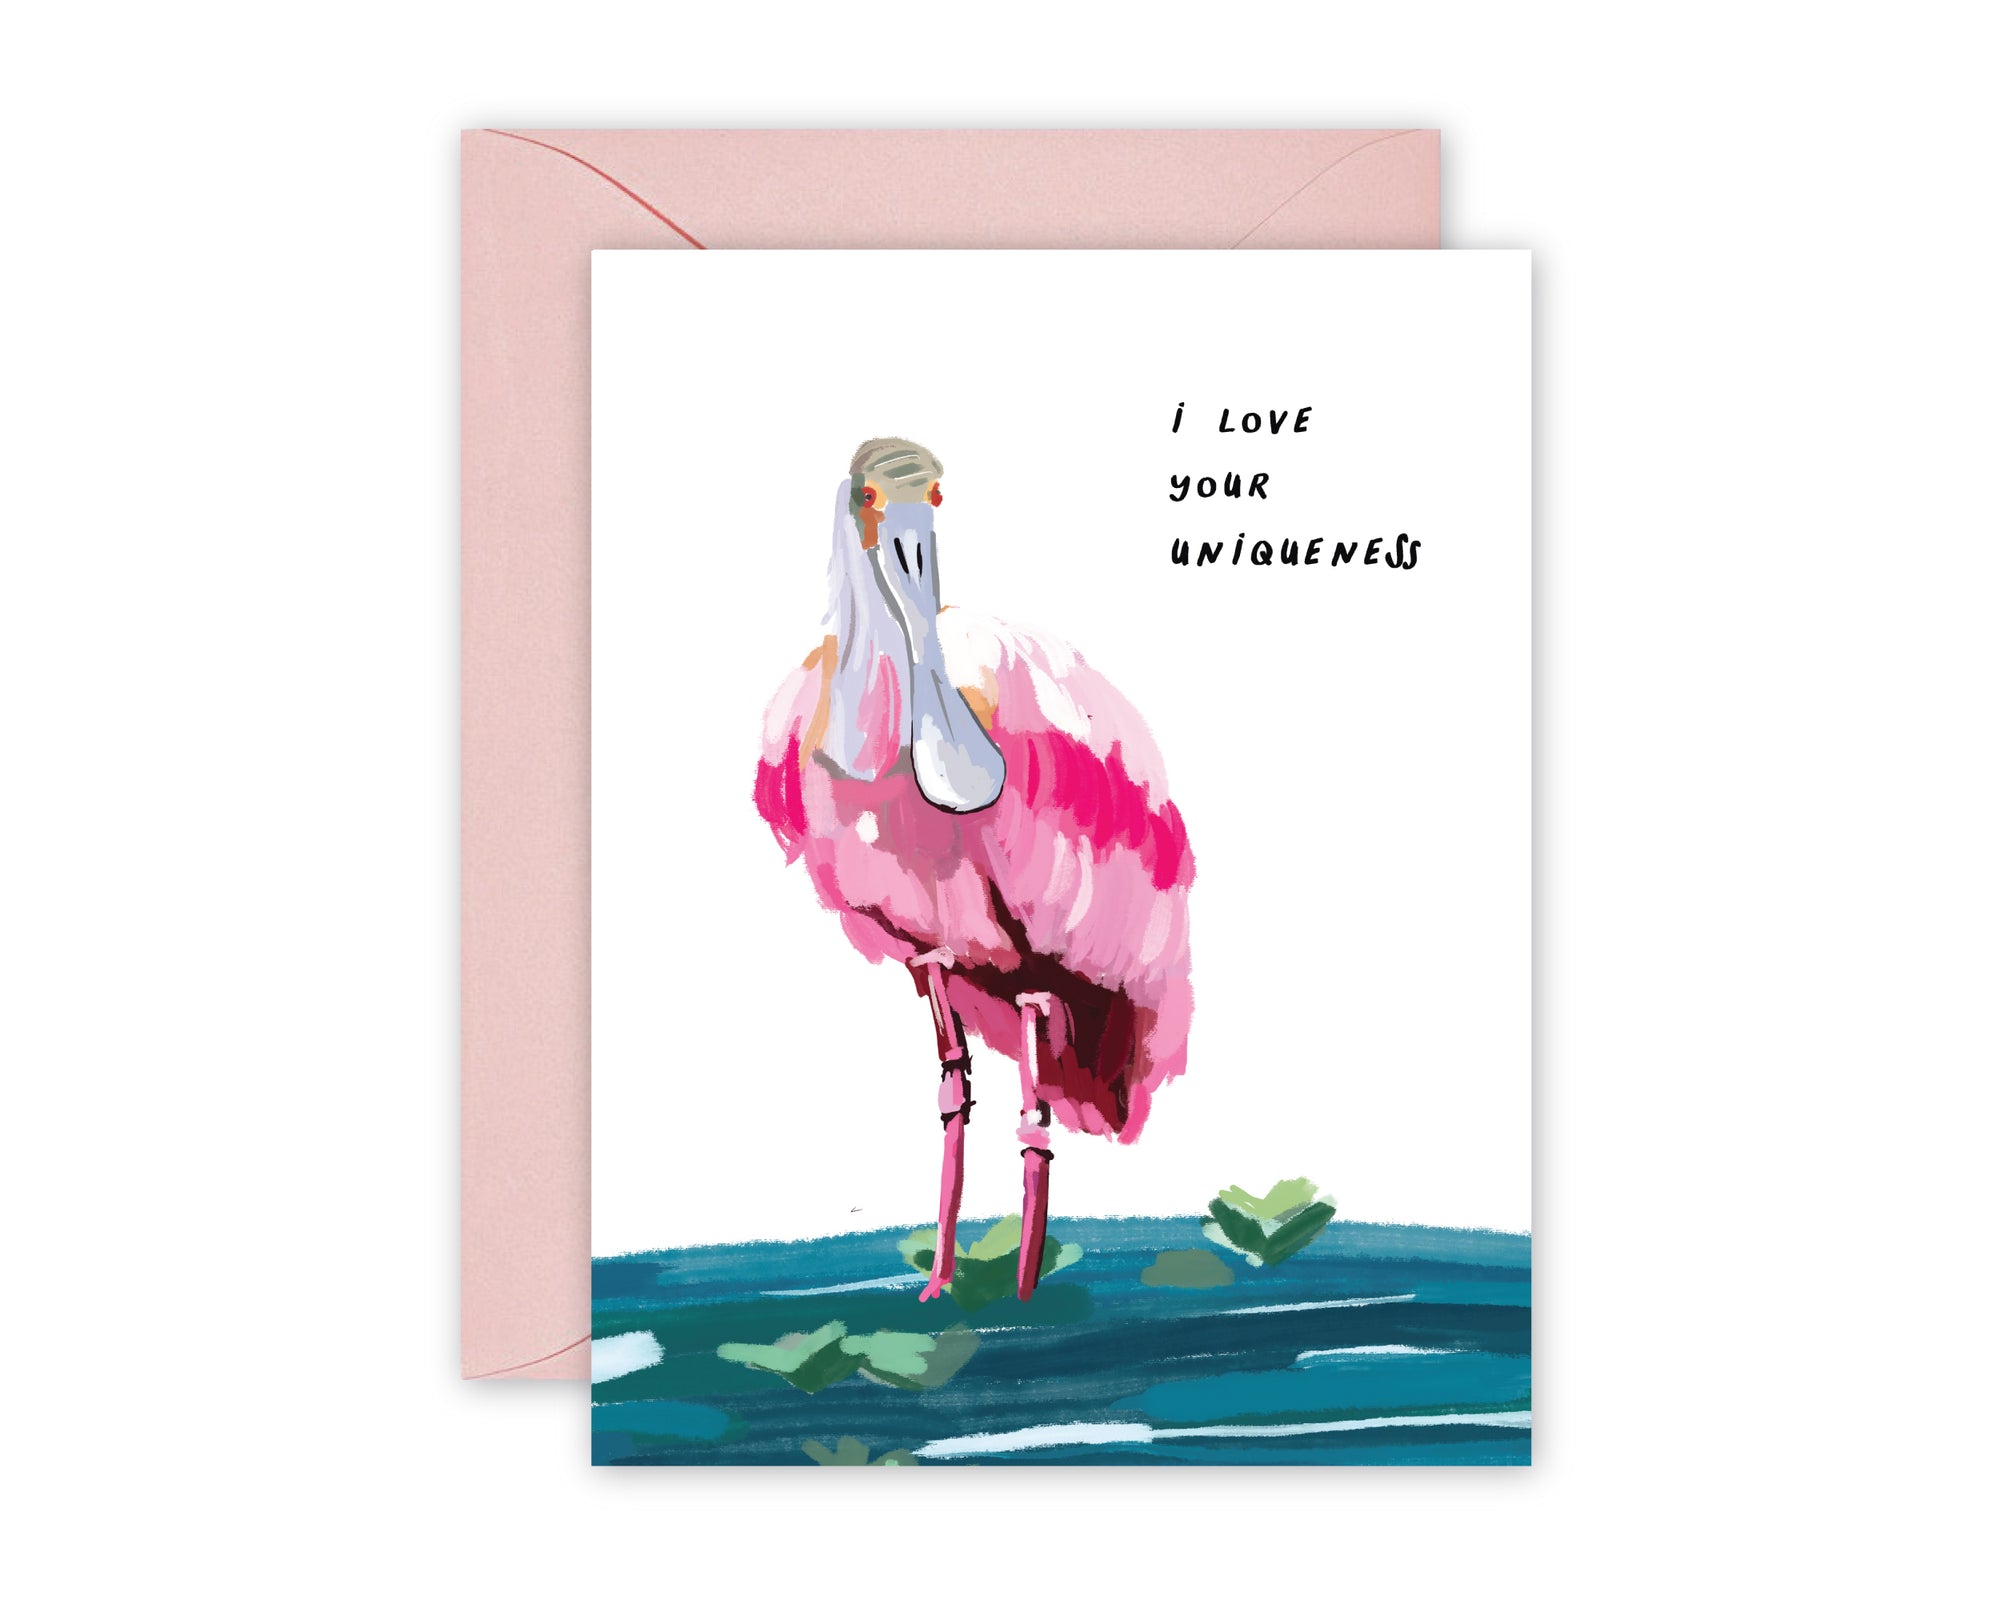 greeting card with colorful illustrated spoonbill in shades of pink and fuschia. card says I love your uniqueness.